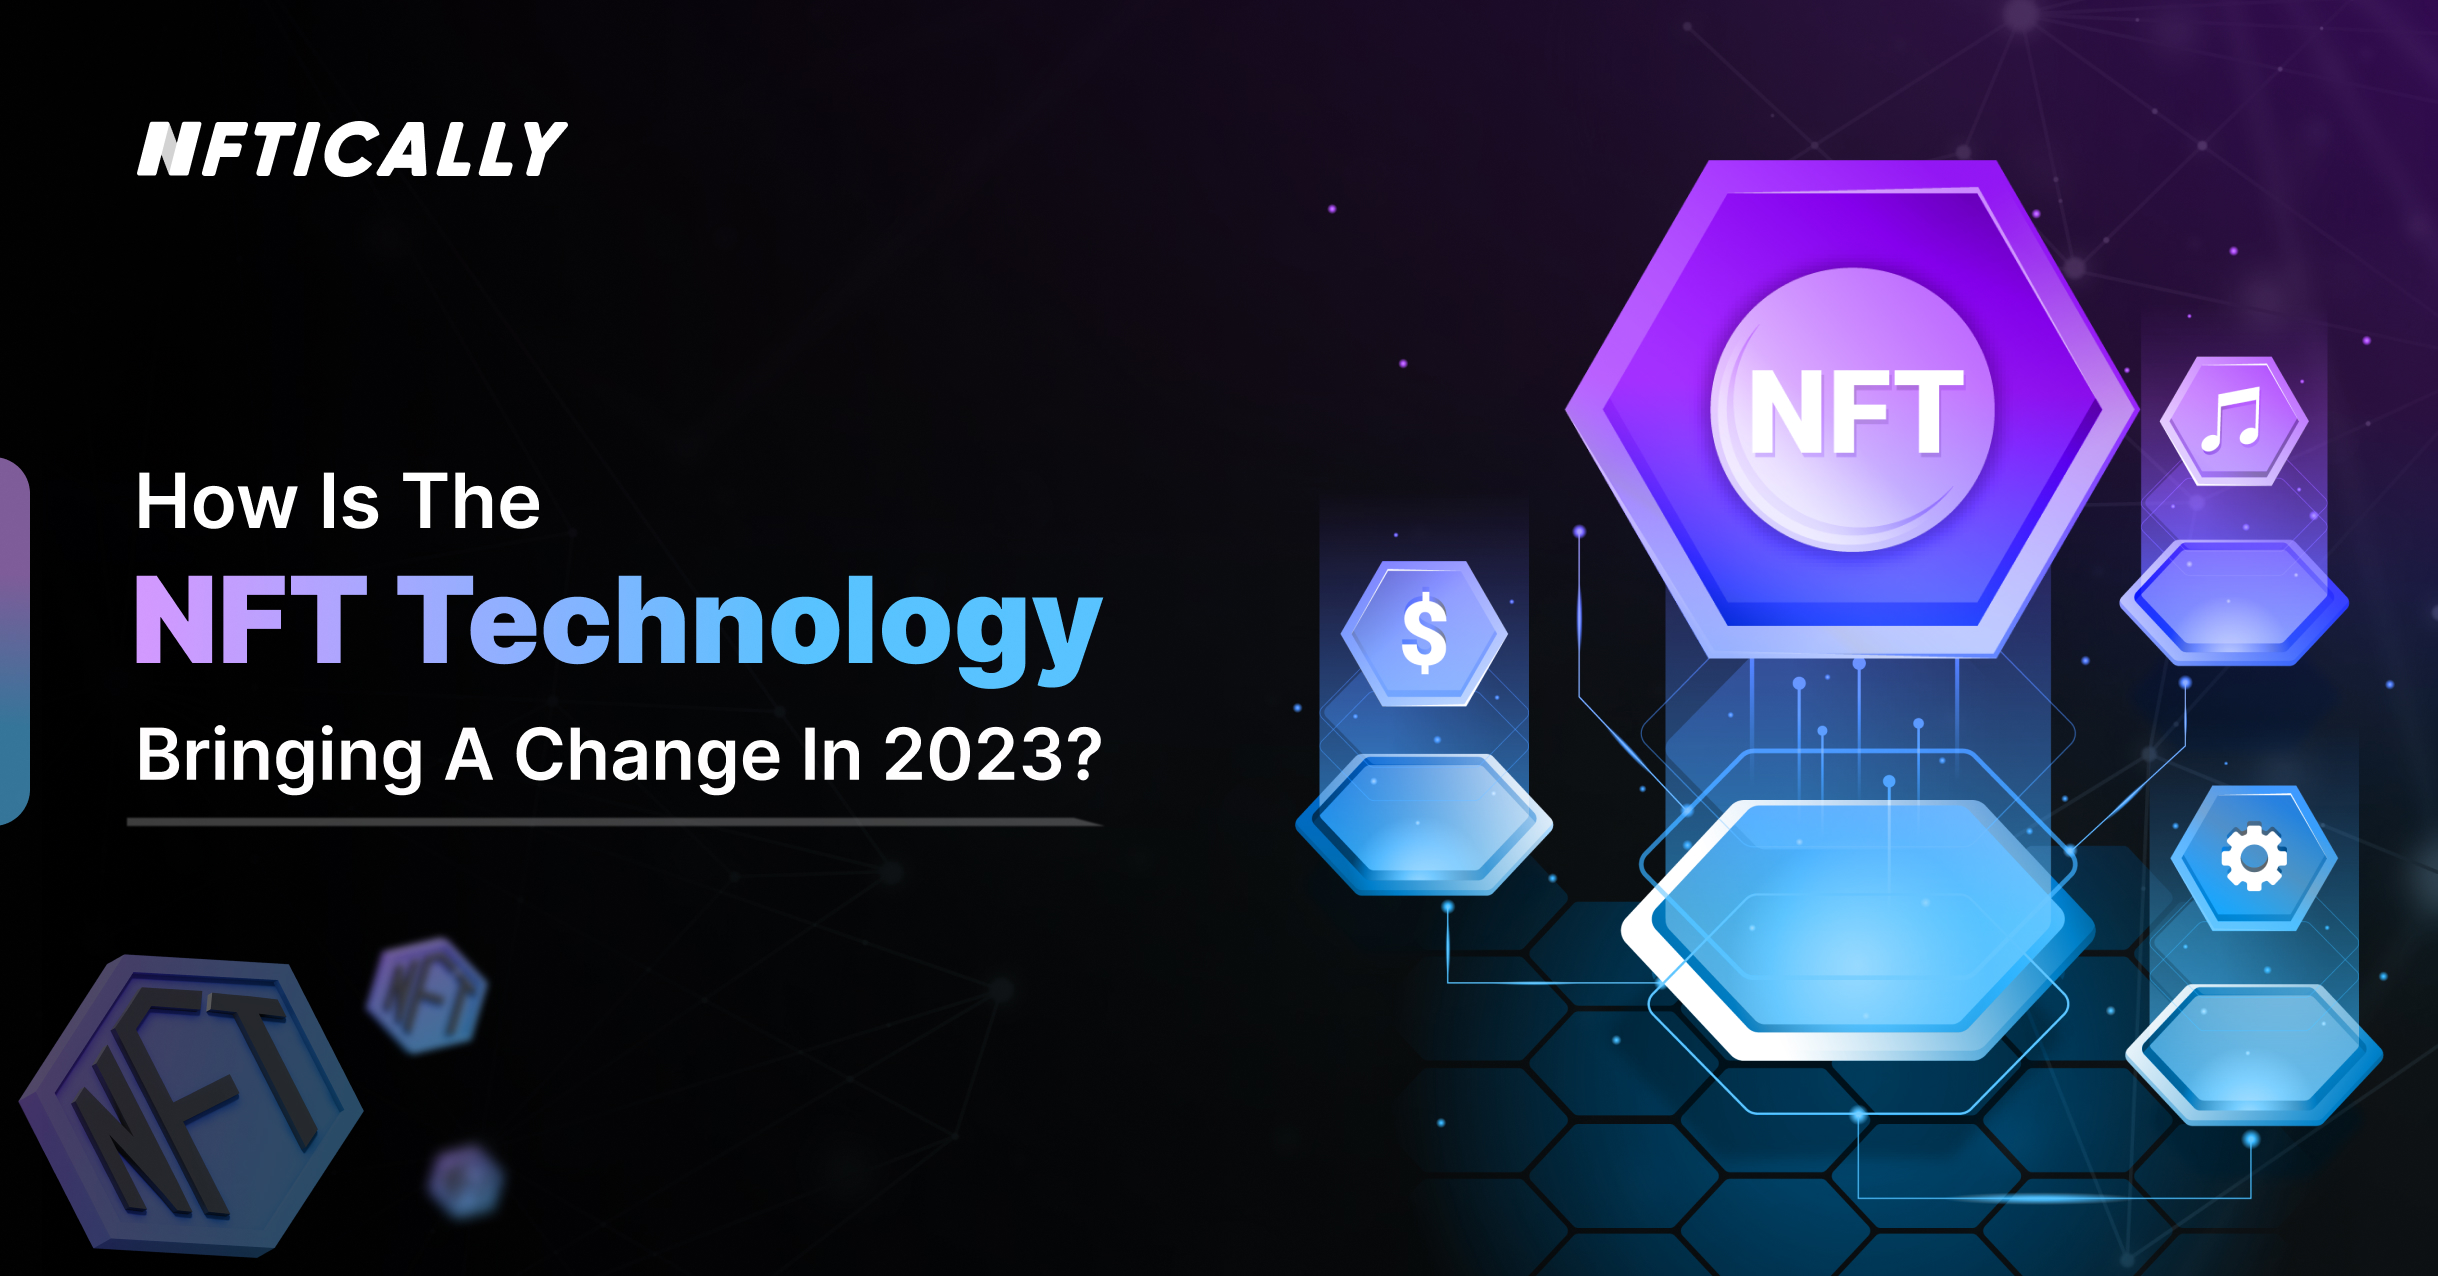 How is NFT technology bringing a change in 2023?